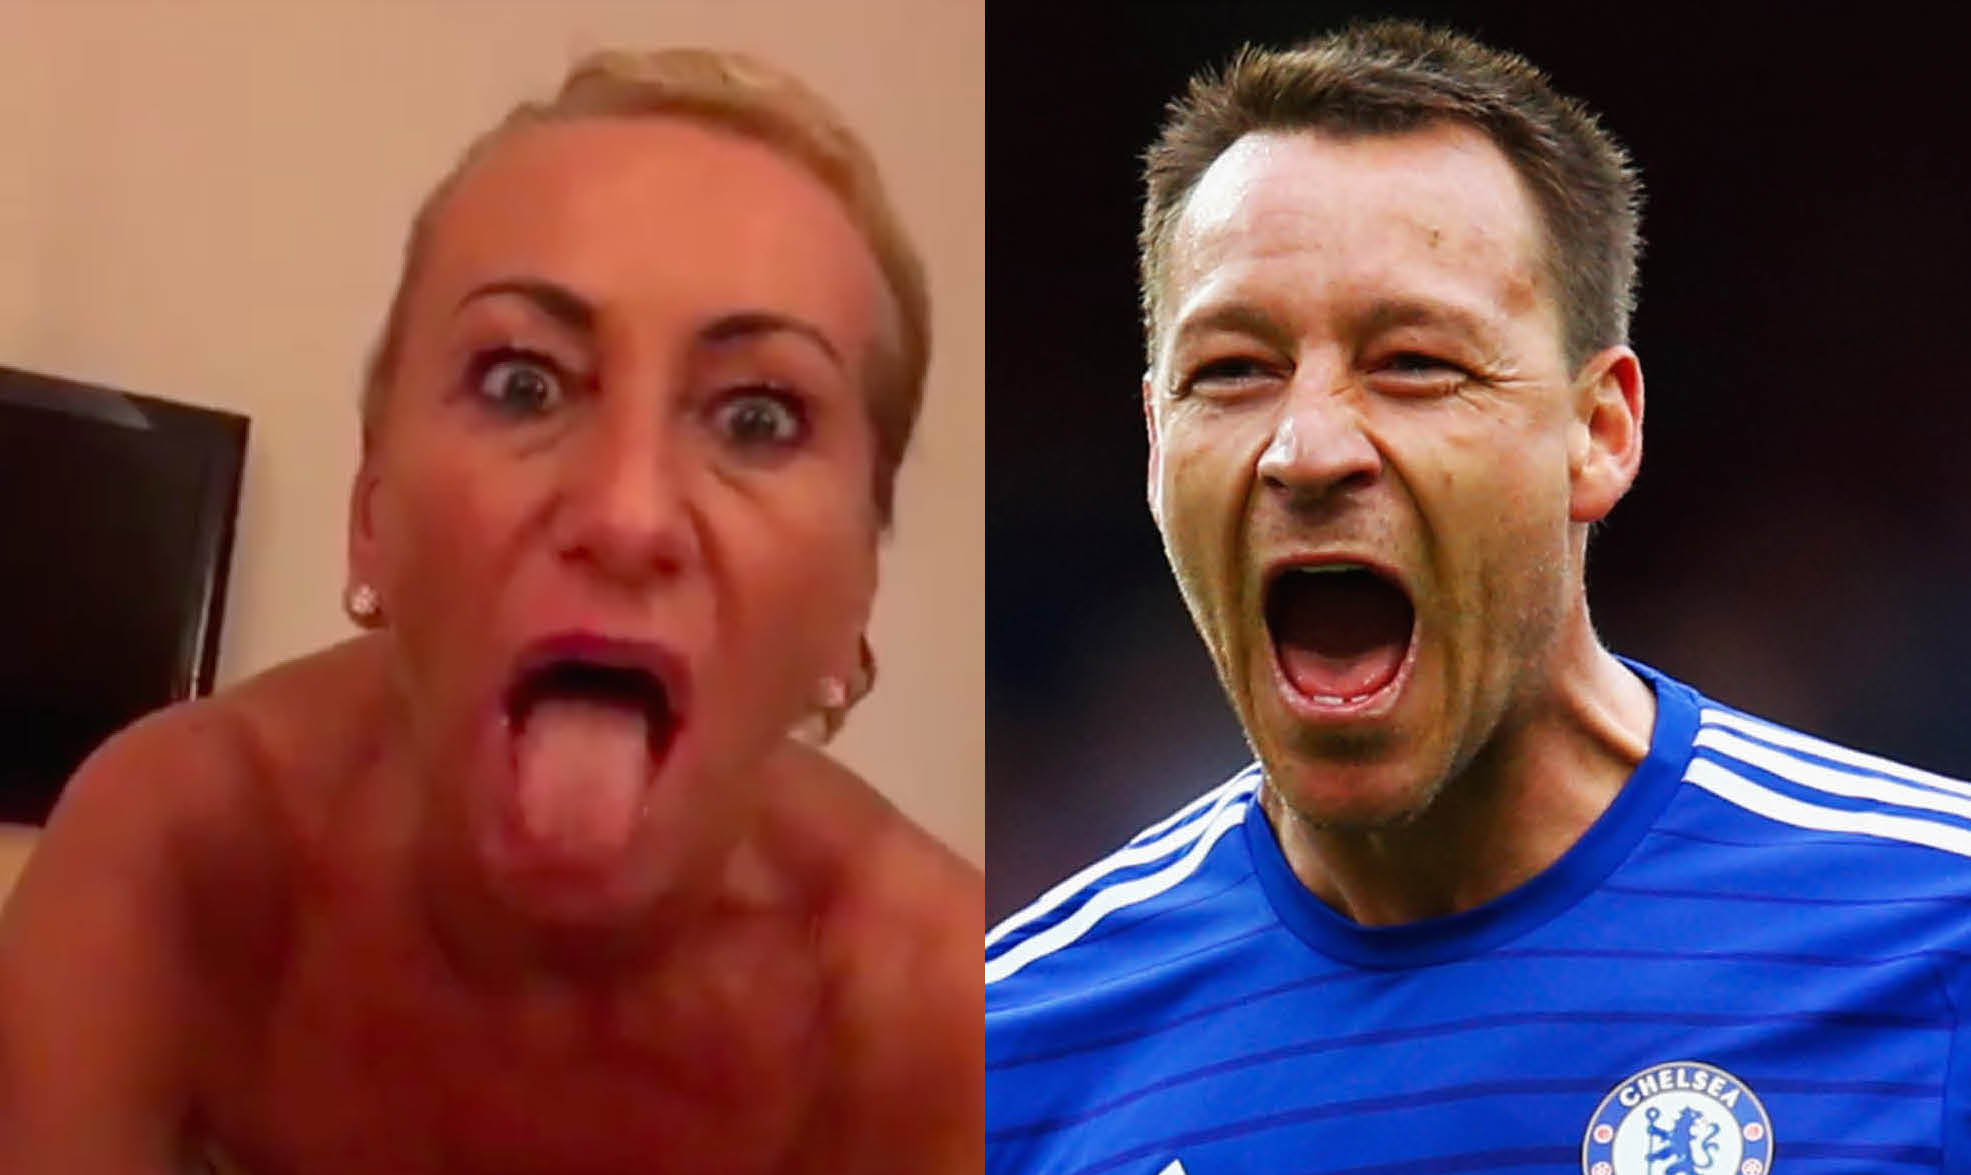 Sex Vedio Jon - People Are Claiming This Is A Sex Video Of John Terry's Mum (VIDEO ...